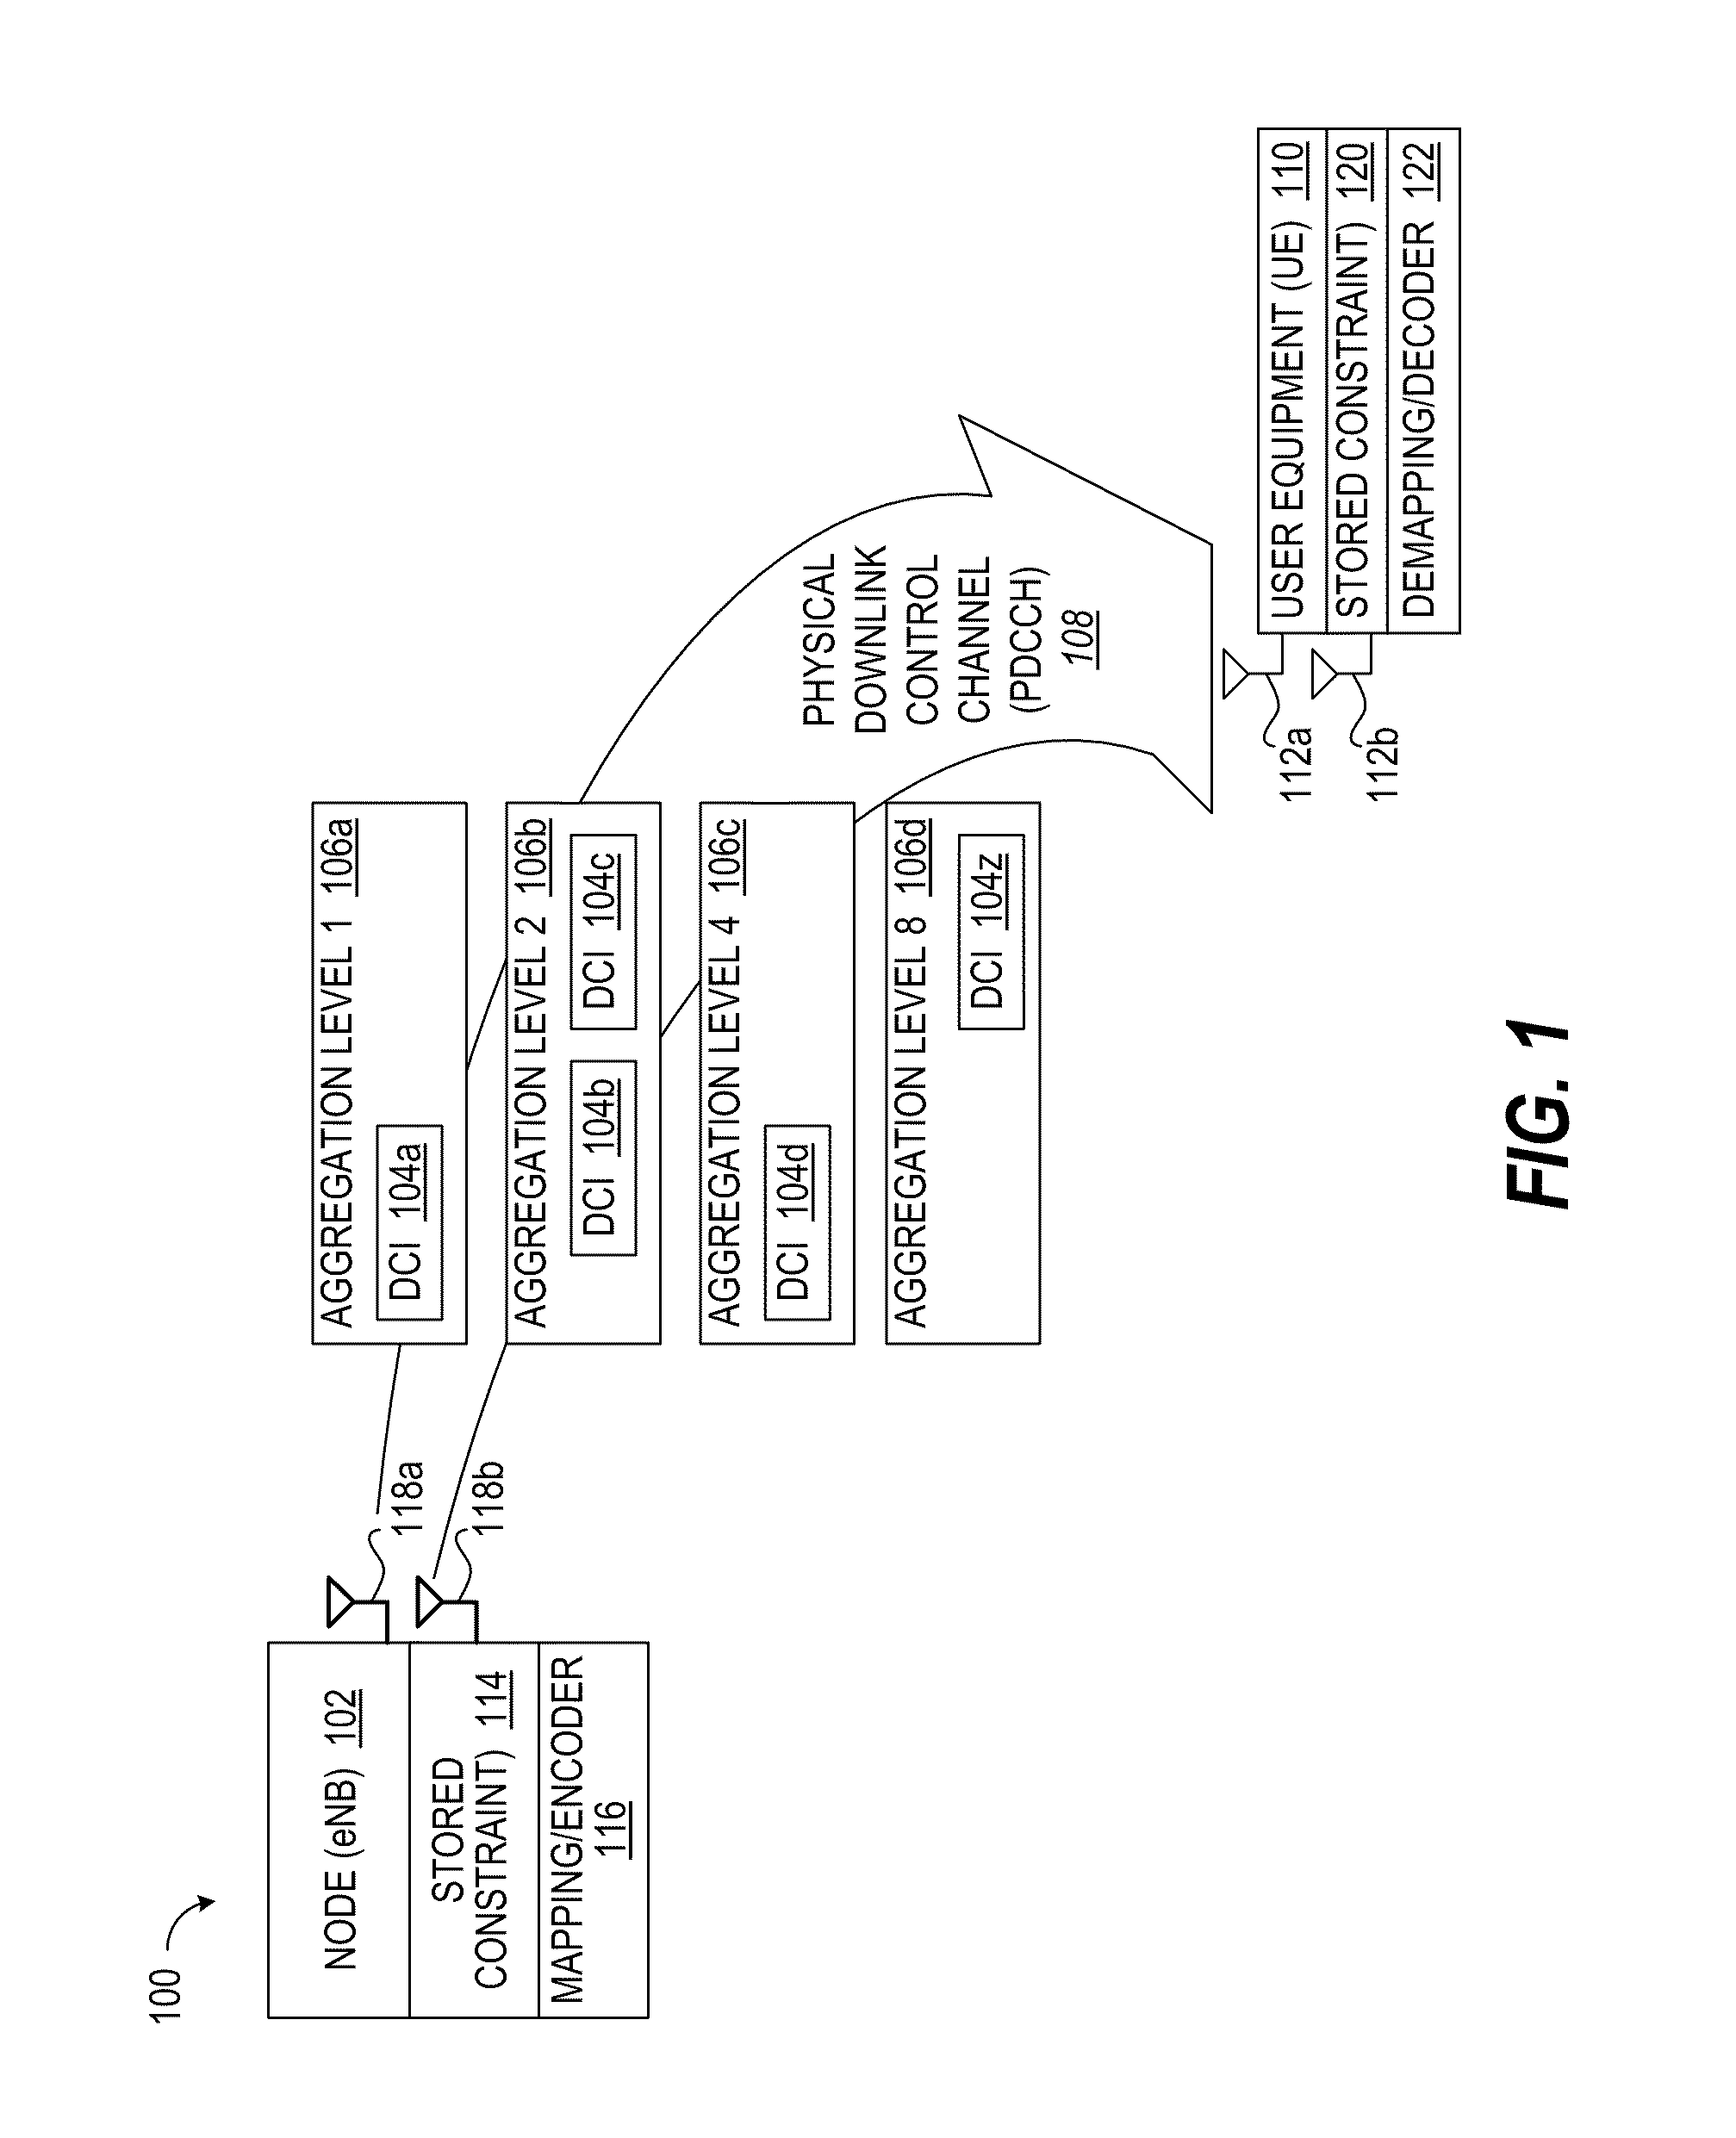 Downlink control transmission in multicarrier operation